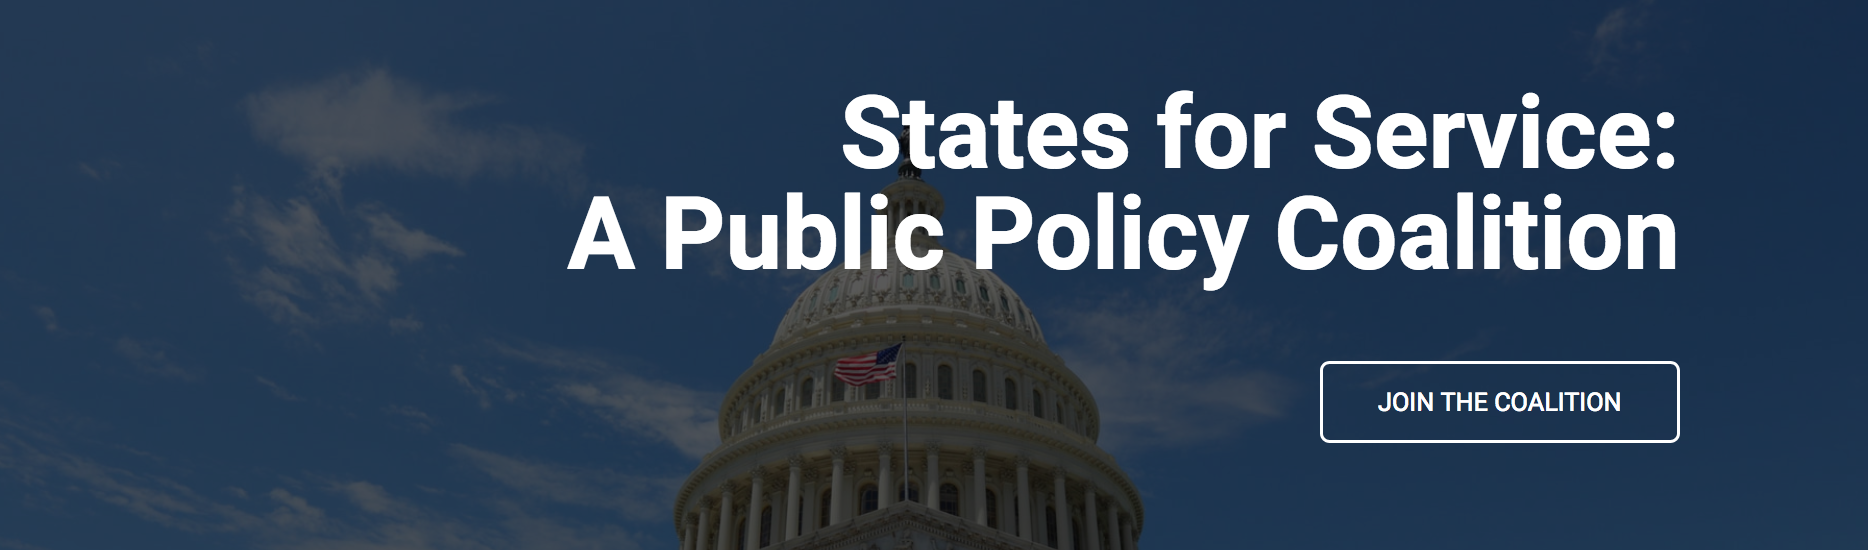 States for Service: A Public Policy Coalition